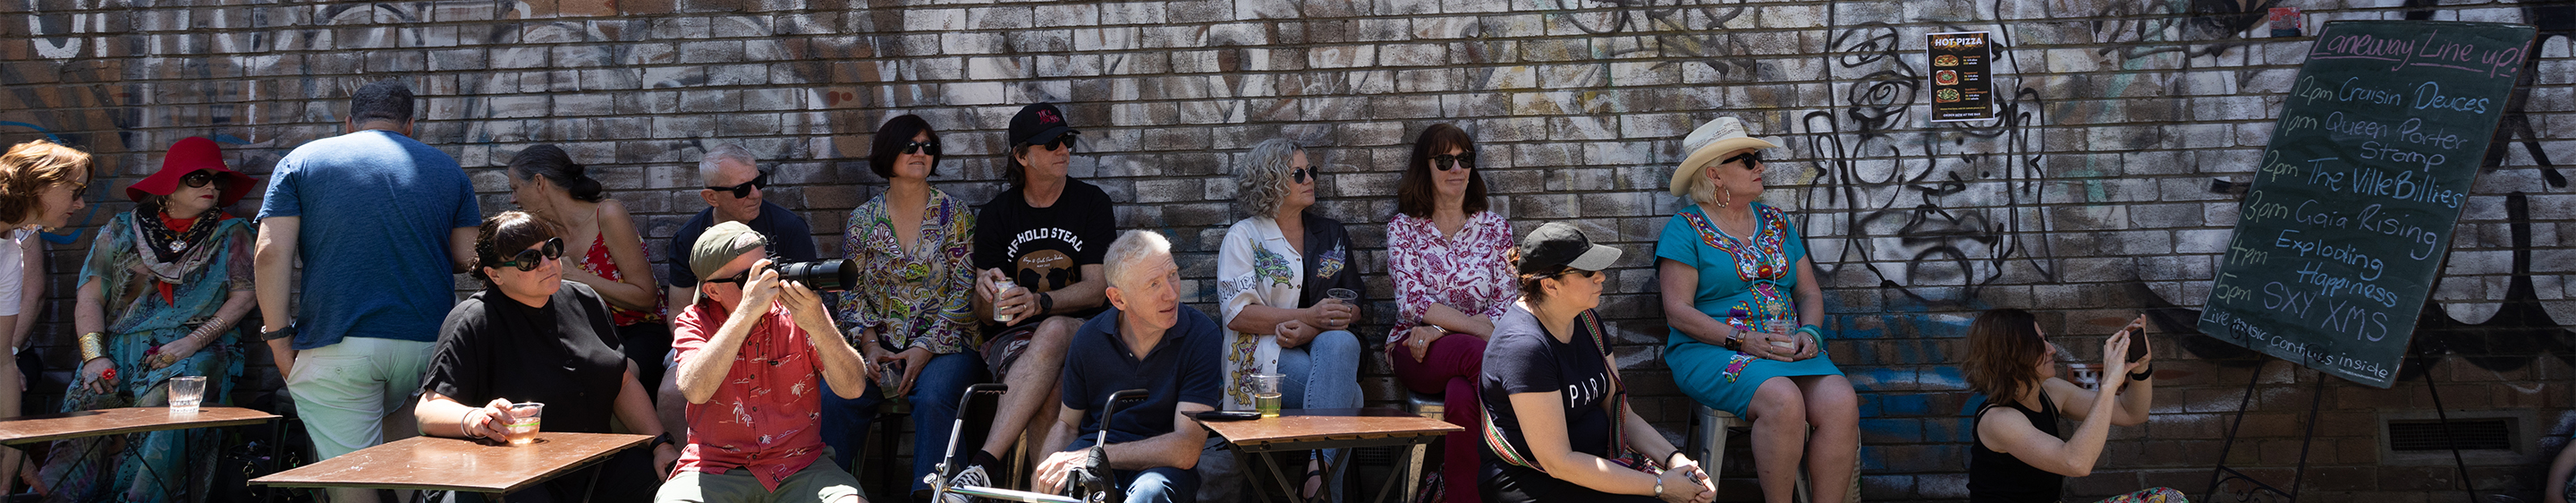 a group of people sitting in a laneway